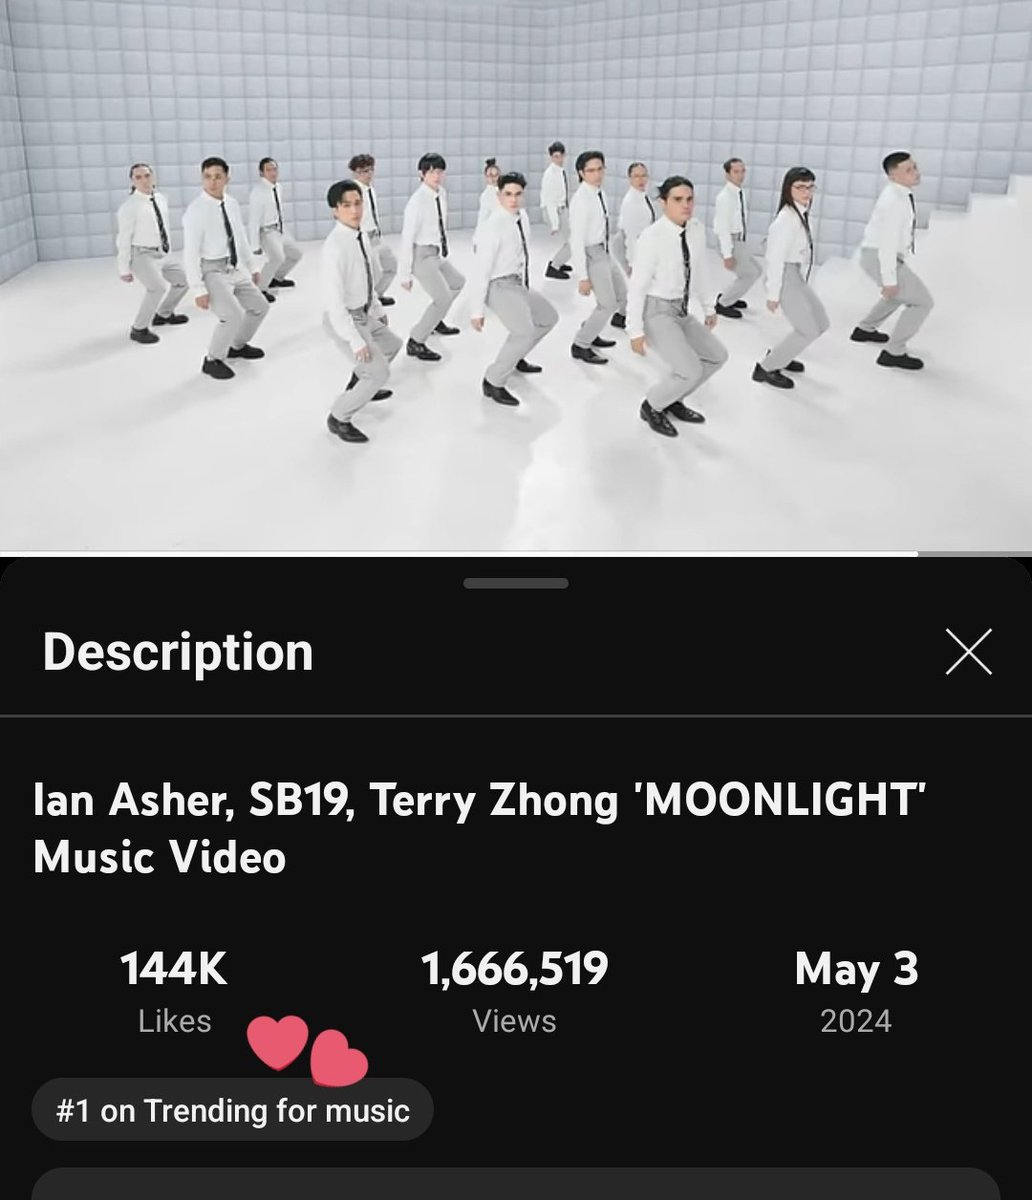 The #MOONLIGHT Music Video is now YouTube PH's #1 on Trending for music! 👏 Keep swimming, A'TIN! @SB19Official #SB19 #IanxSB19xTerry